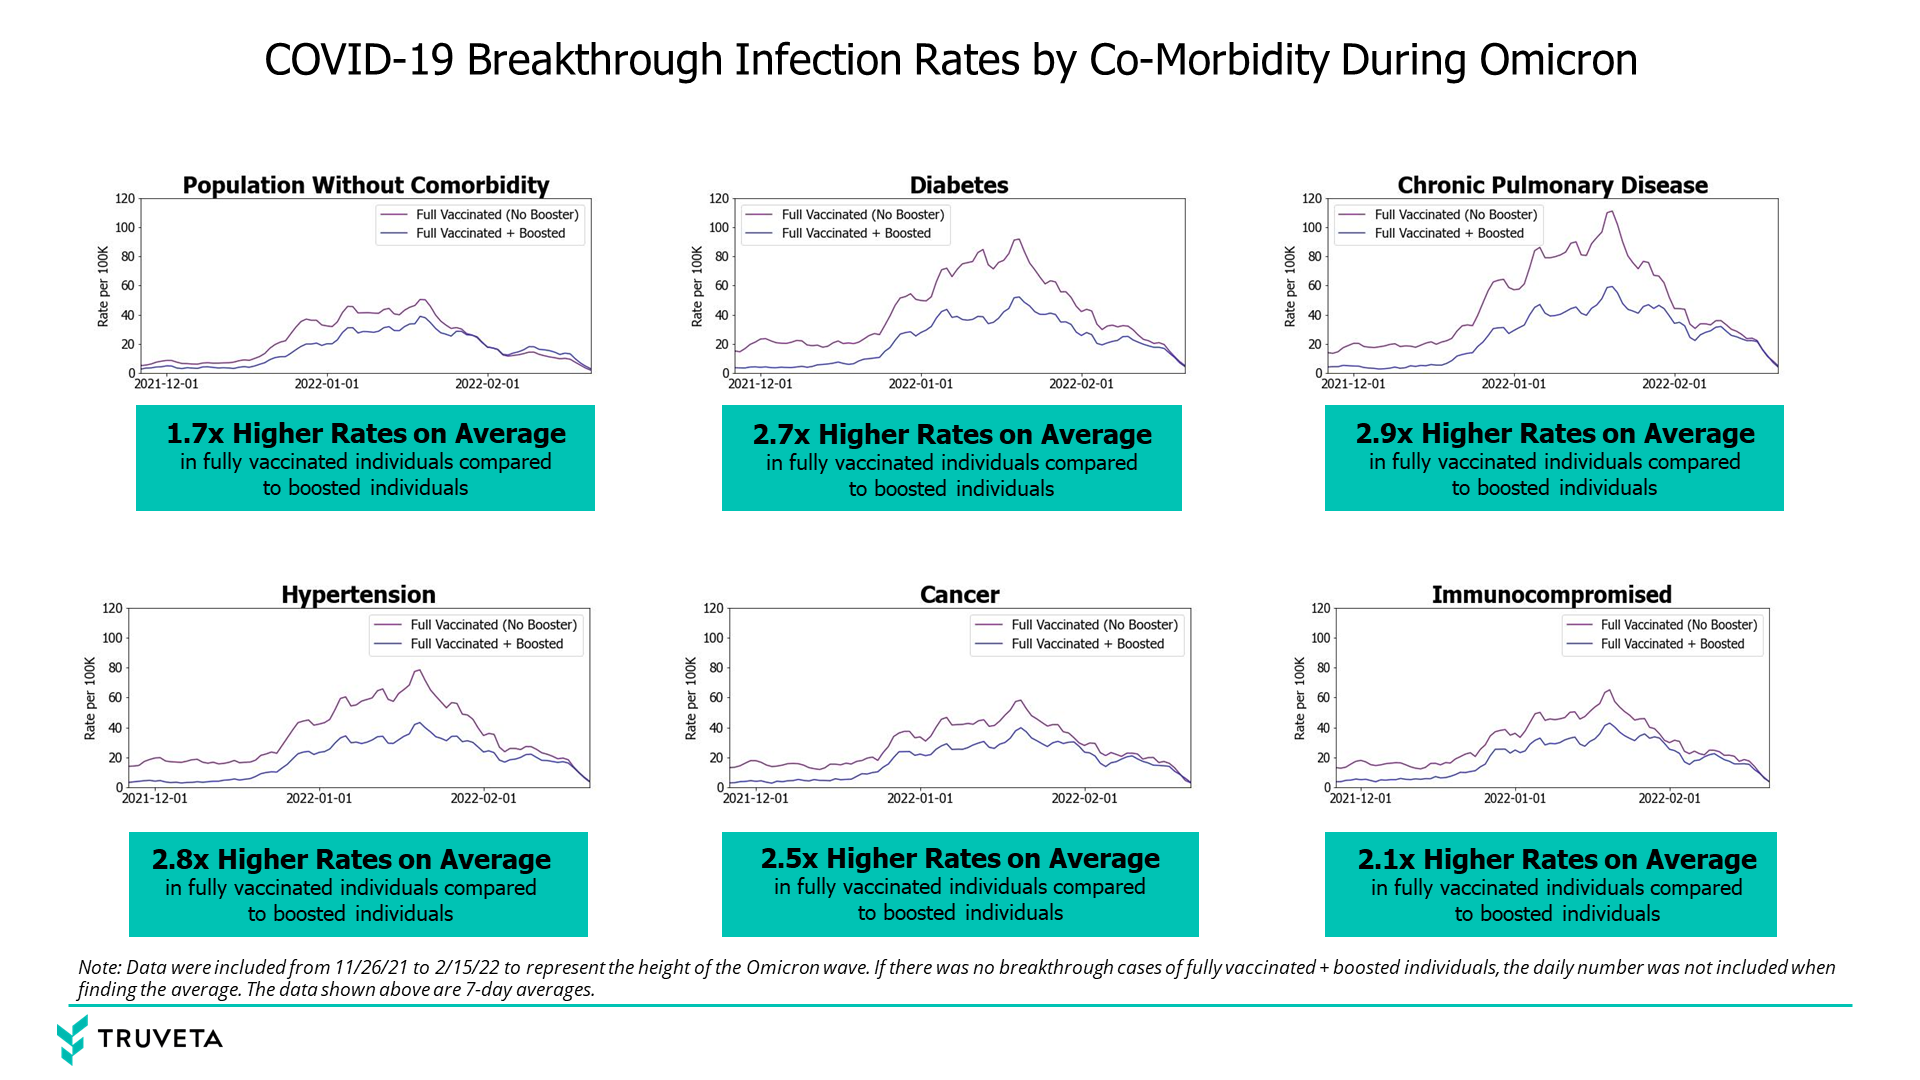 COVID-19 Breakthrough Infection Rates by Co-Morbidity During Omicron